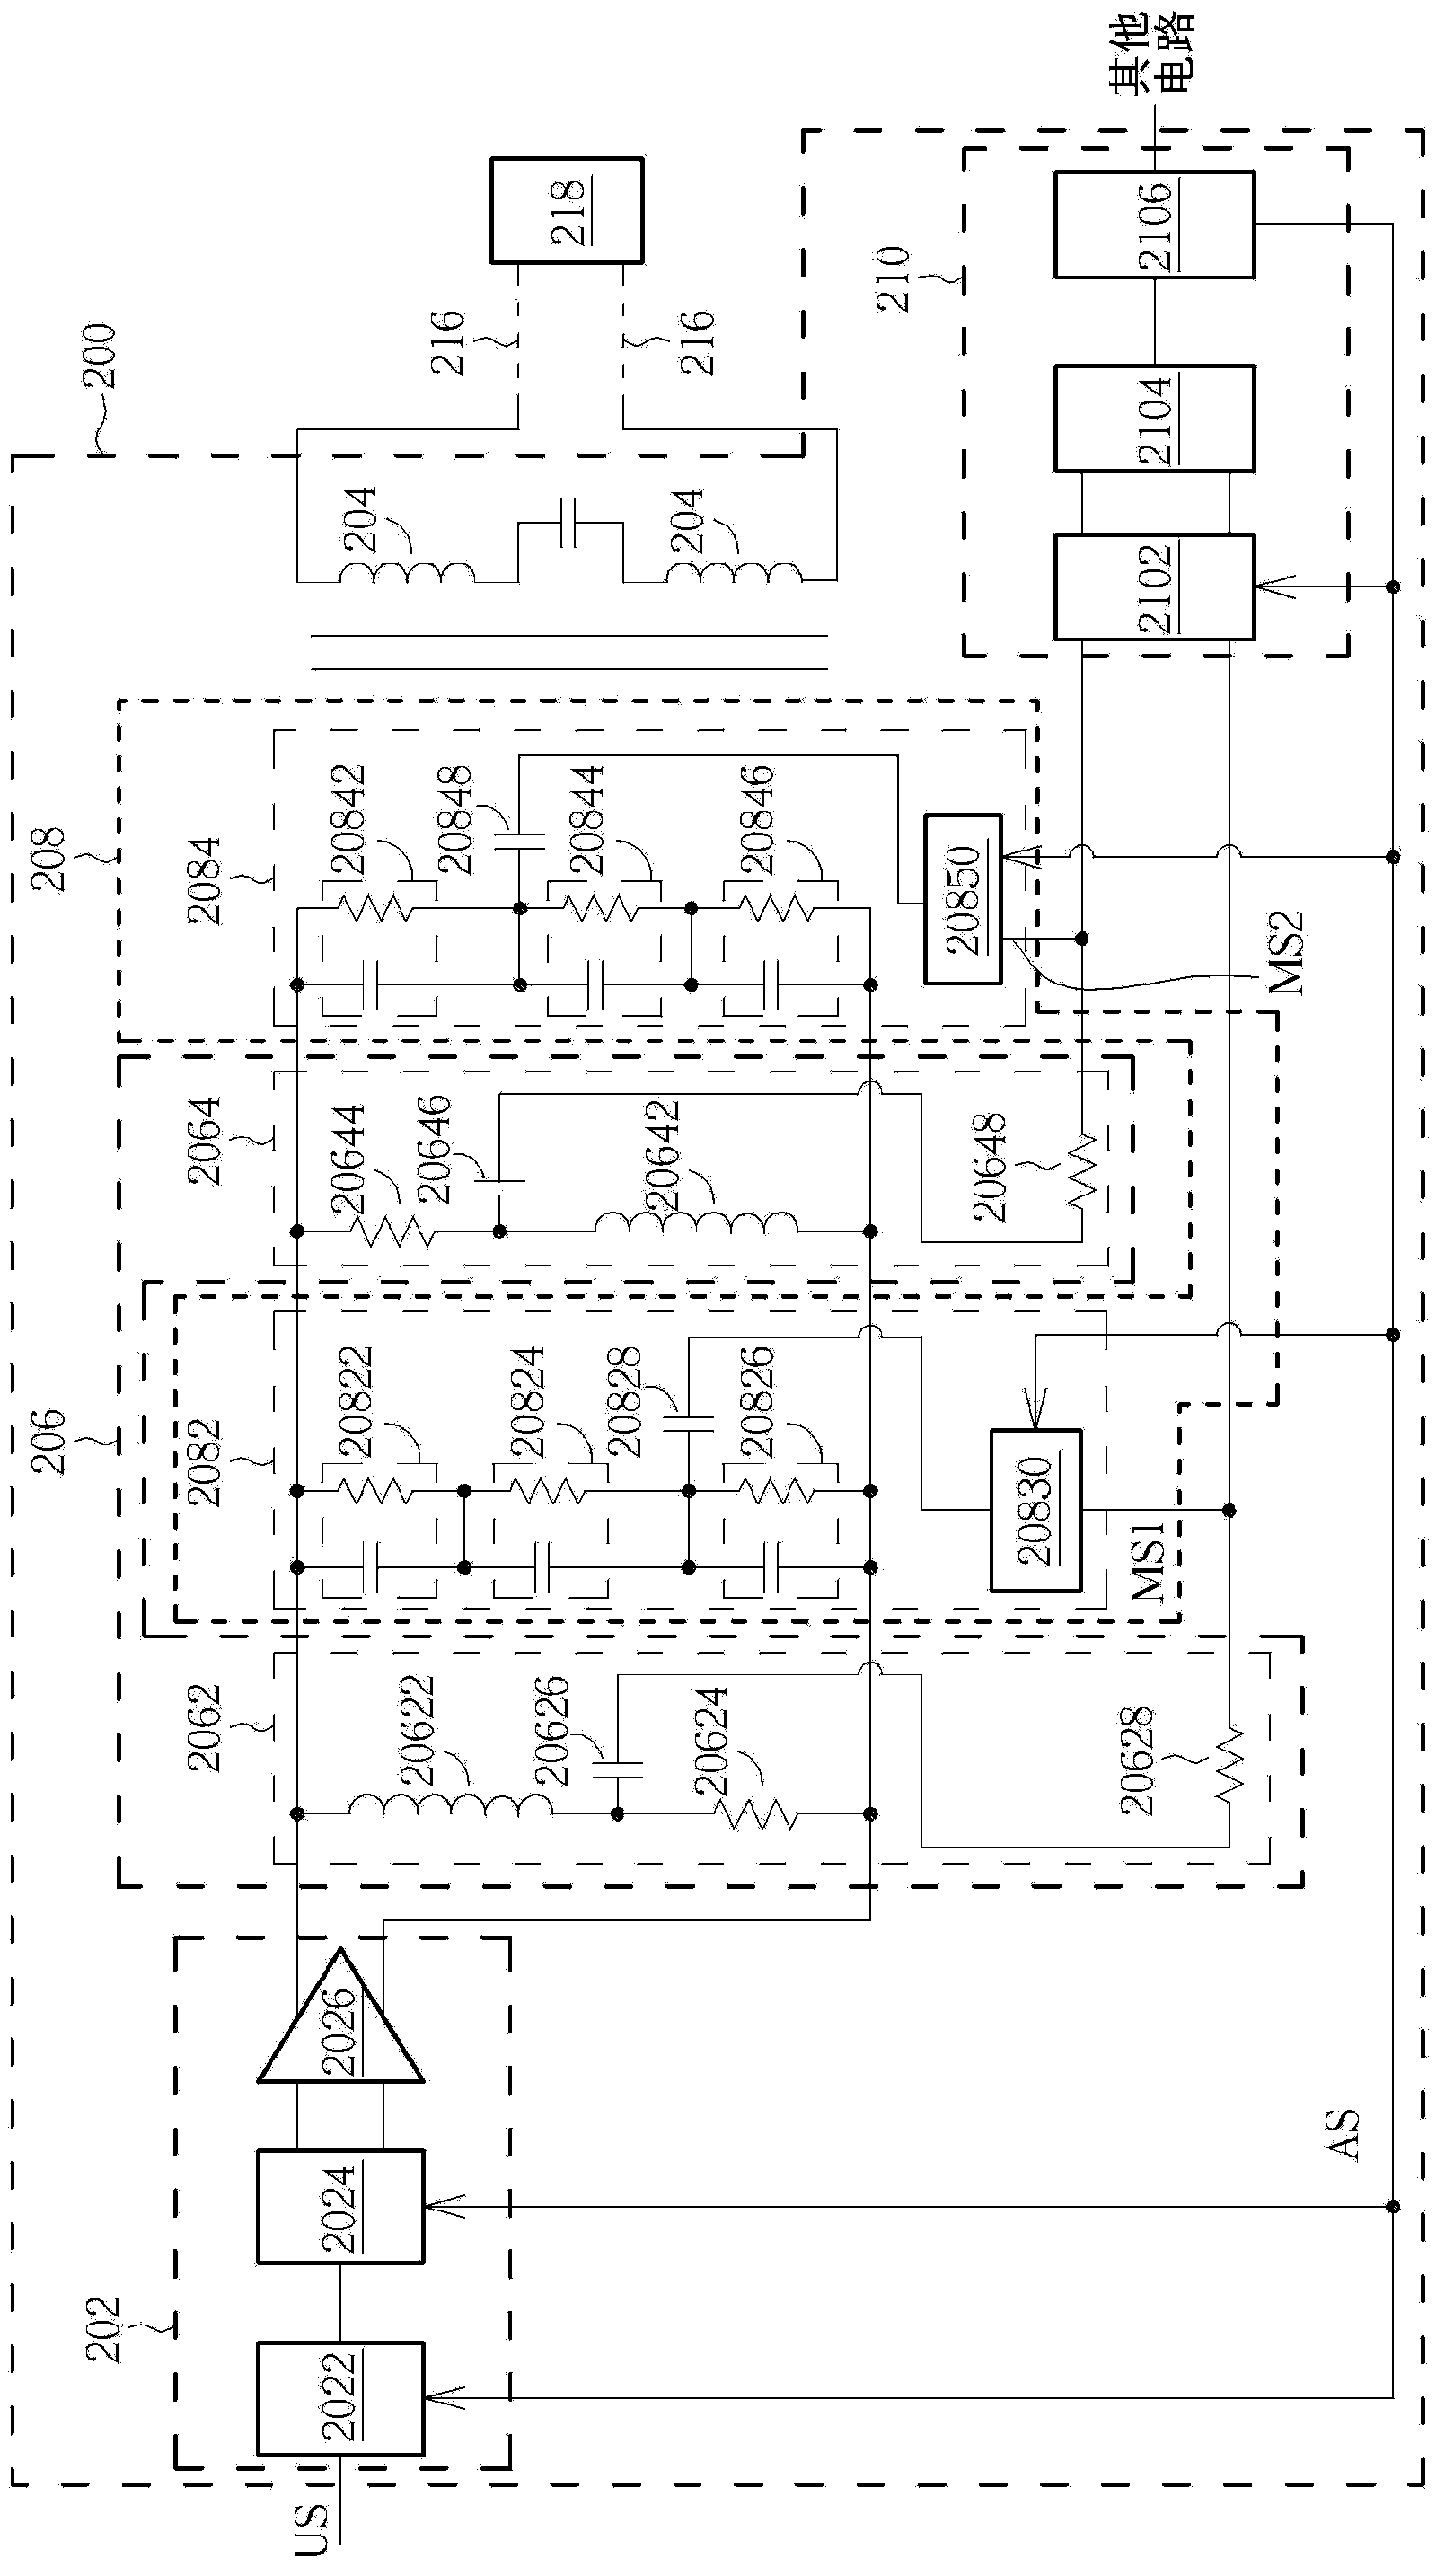 Method for setting transceiving system integrating mixer circuit and digital subscriber loop